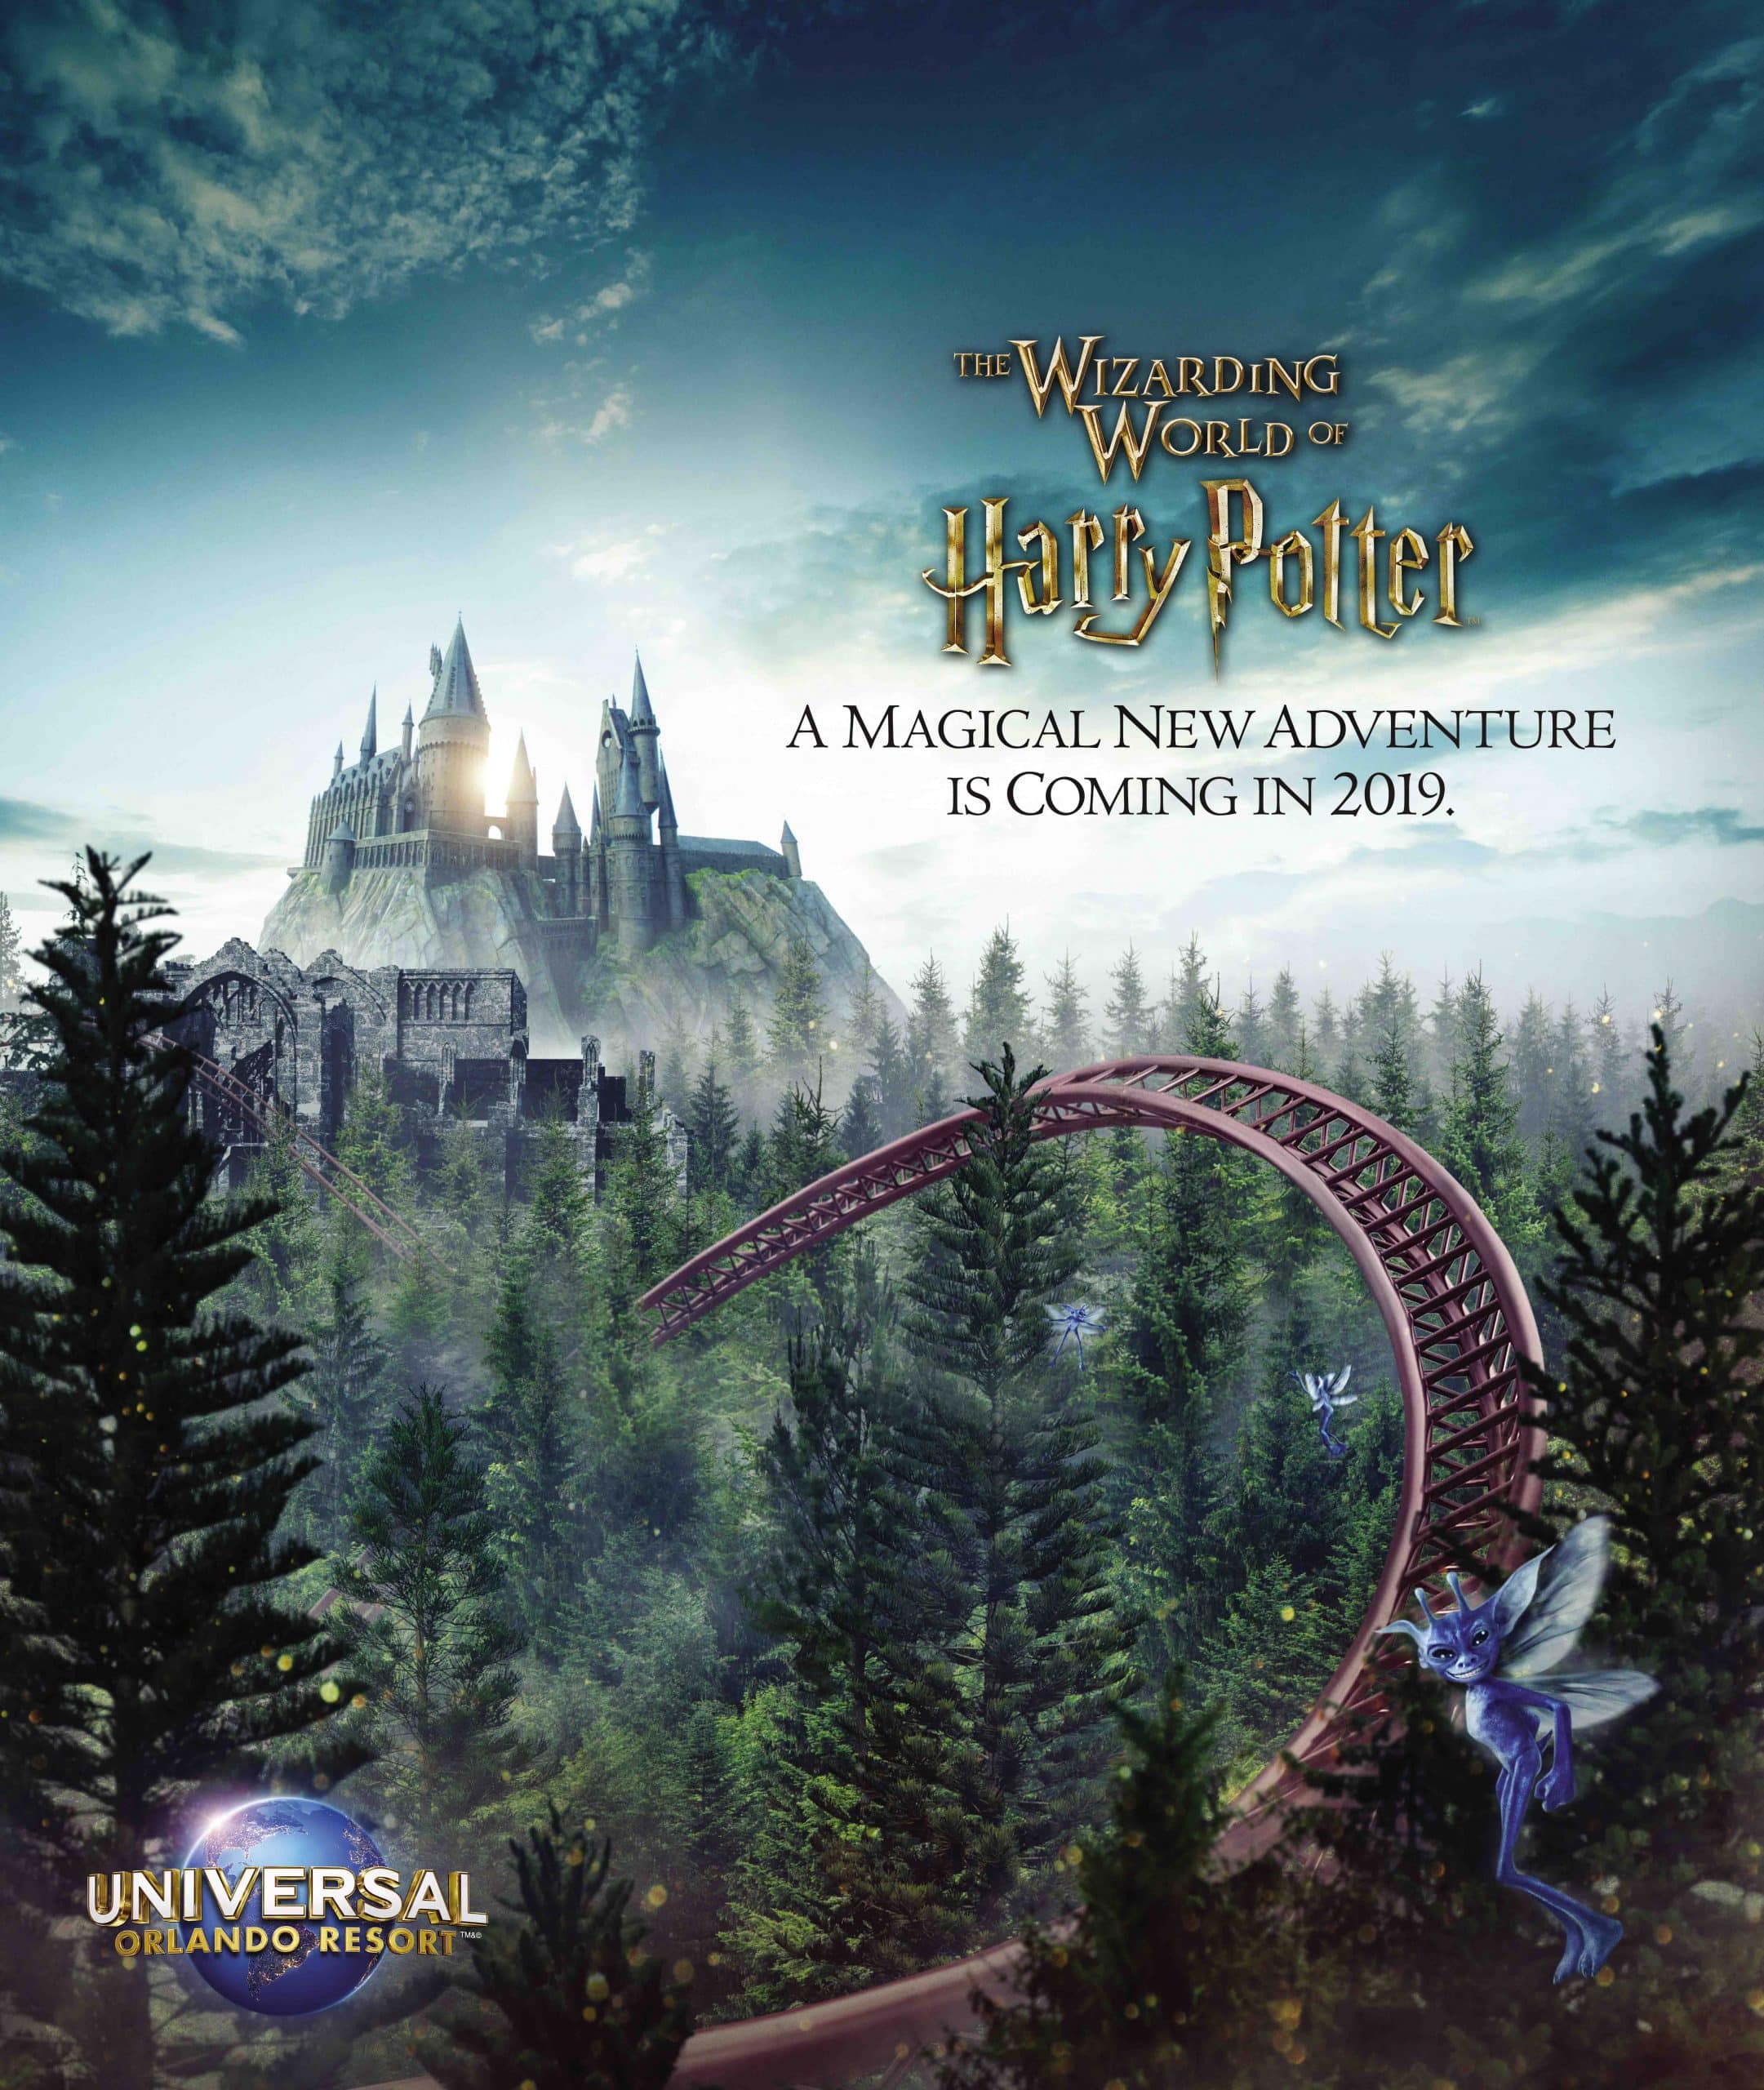 First look at Universal Orlandos new Wizarding World of Harry Potter ...